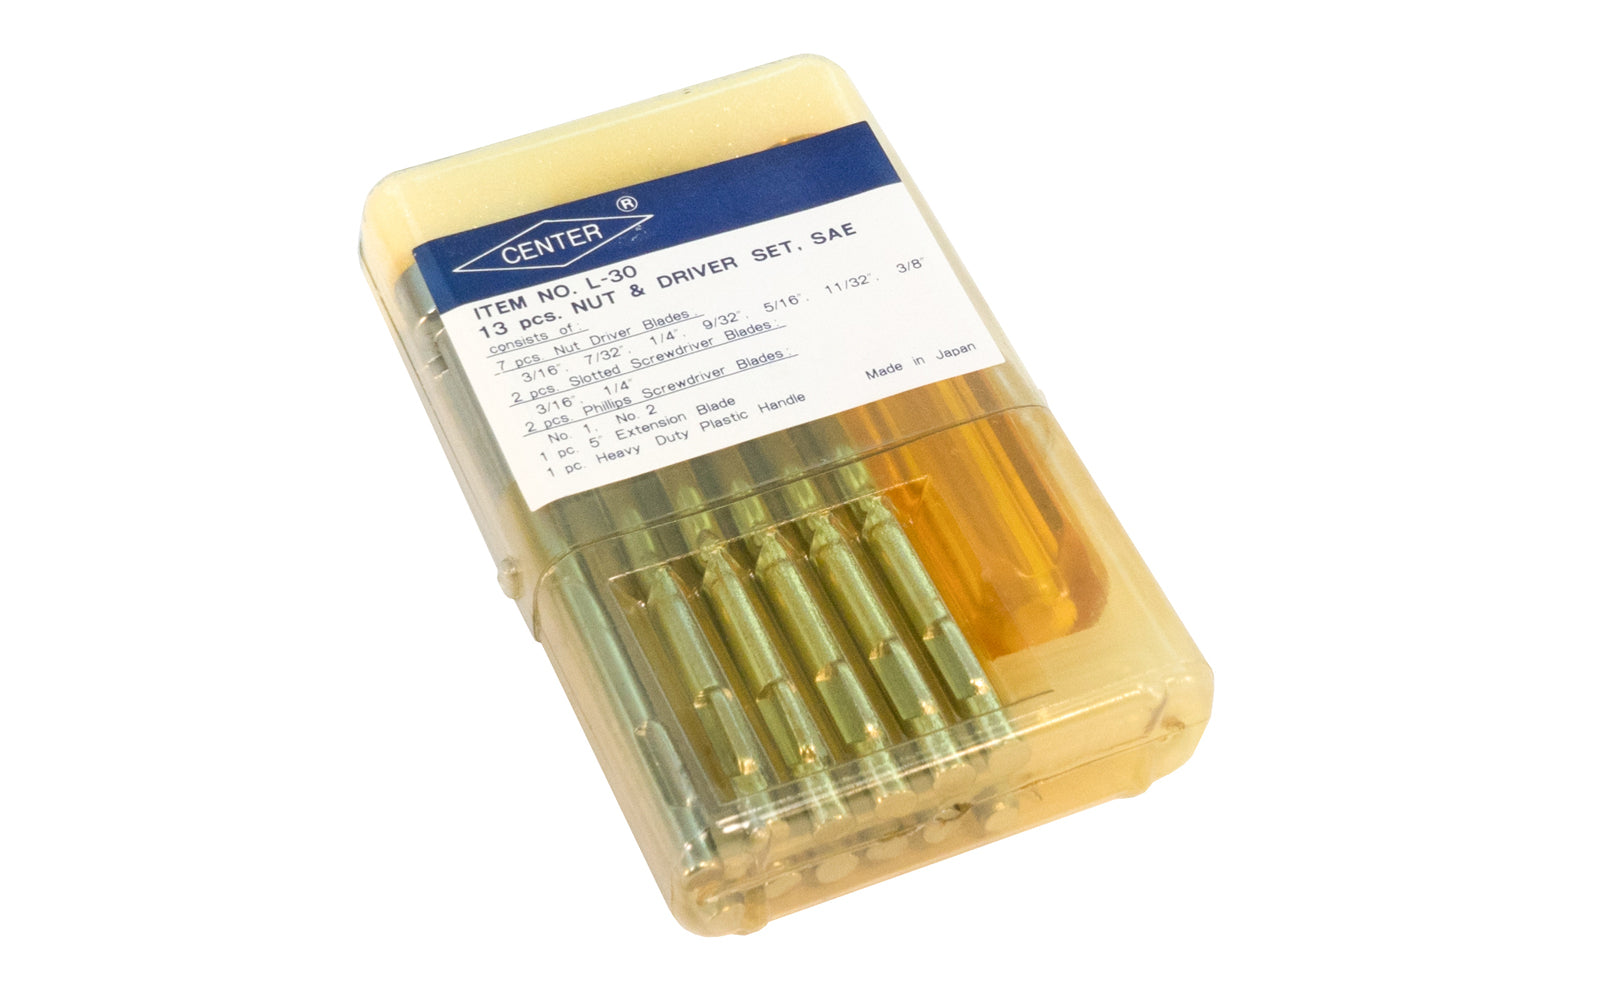 This Japanese-made 13-piece SAE Nut Driver & Screwdriver Set has  3/16",   7/32",   1/4",   9/32",  5/16",  11/32",  3/8" nut driver sizes. 3/16",  1/4" slotted screwdriver blade sizes, &  No. 1  &  No. 2 phillips screwdriver blade sizes. 083144006304.   Made in Japan